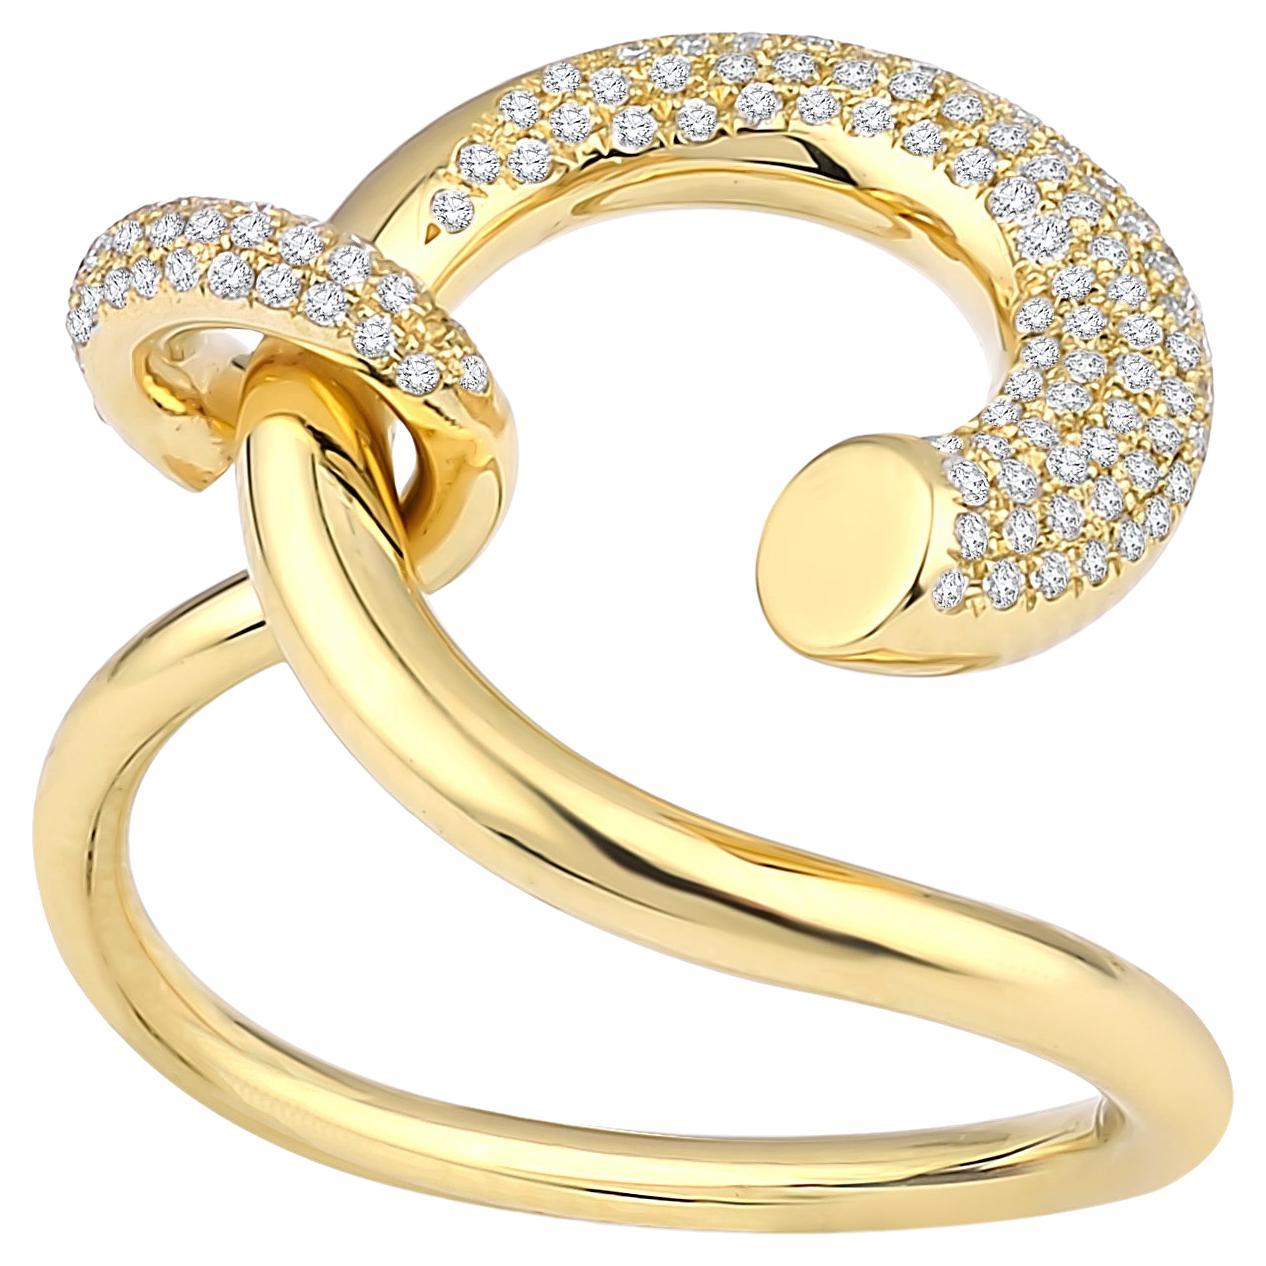 Kloto's Radiant Diamond and 18k Gold Cocktail Ring For Sale